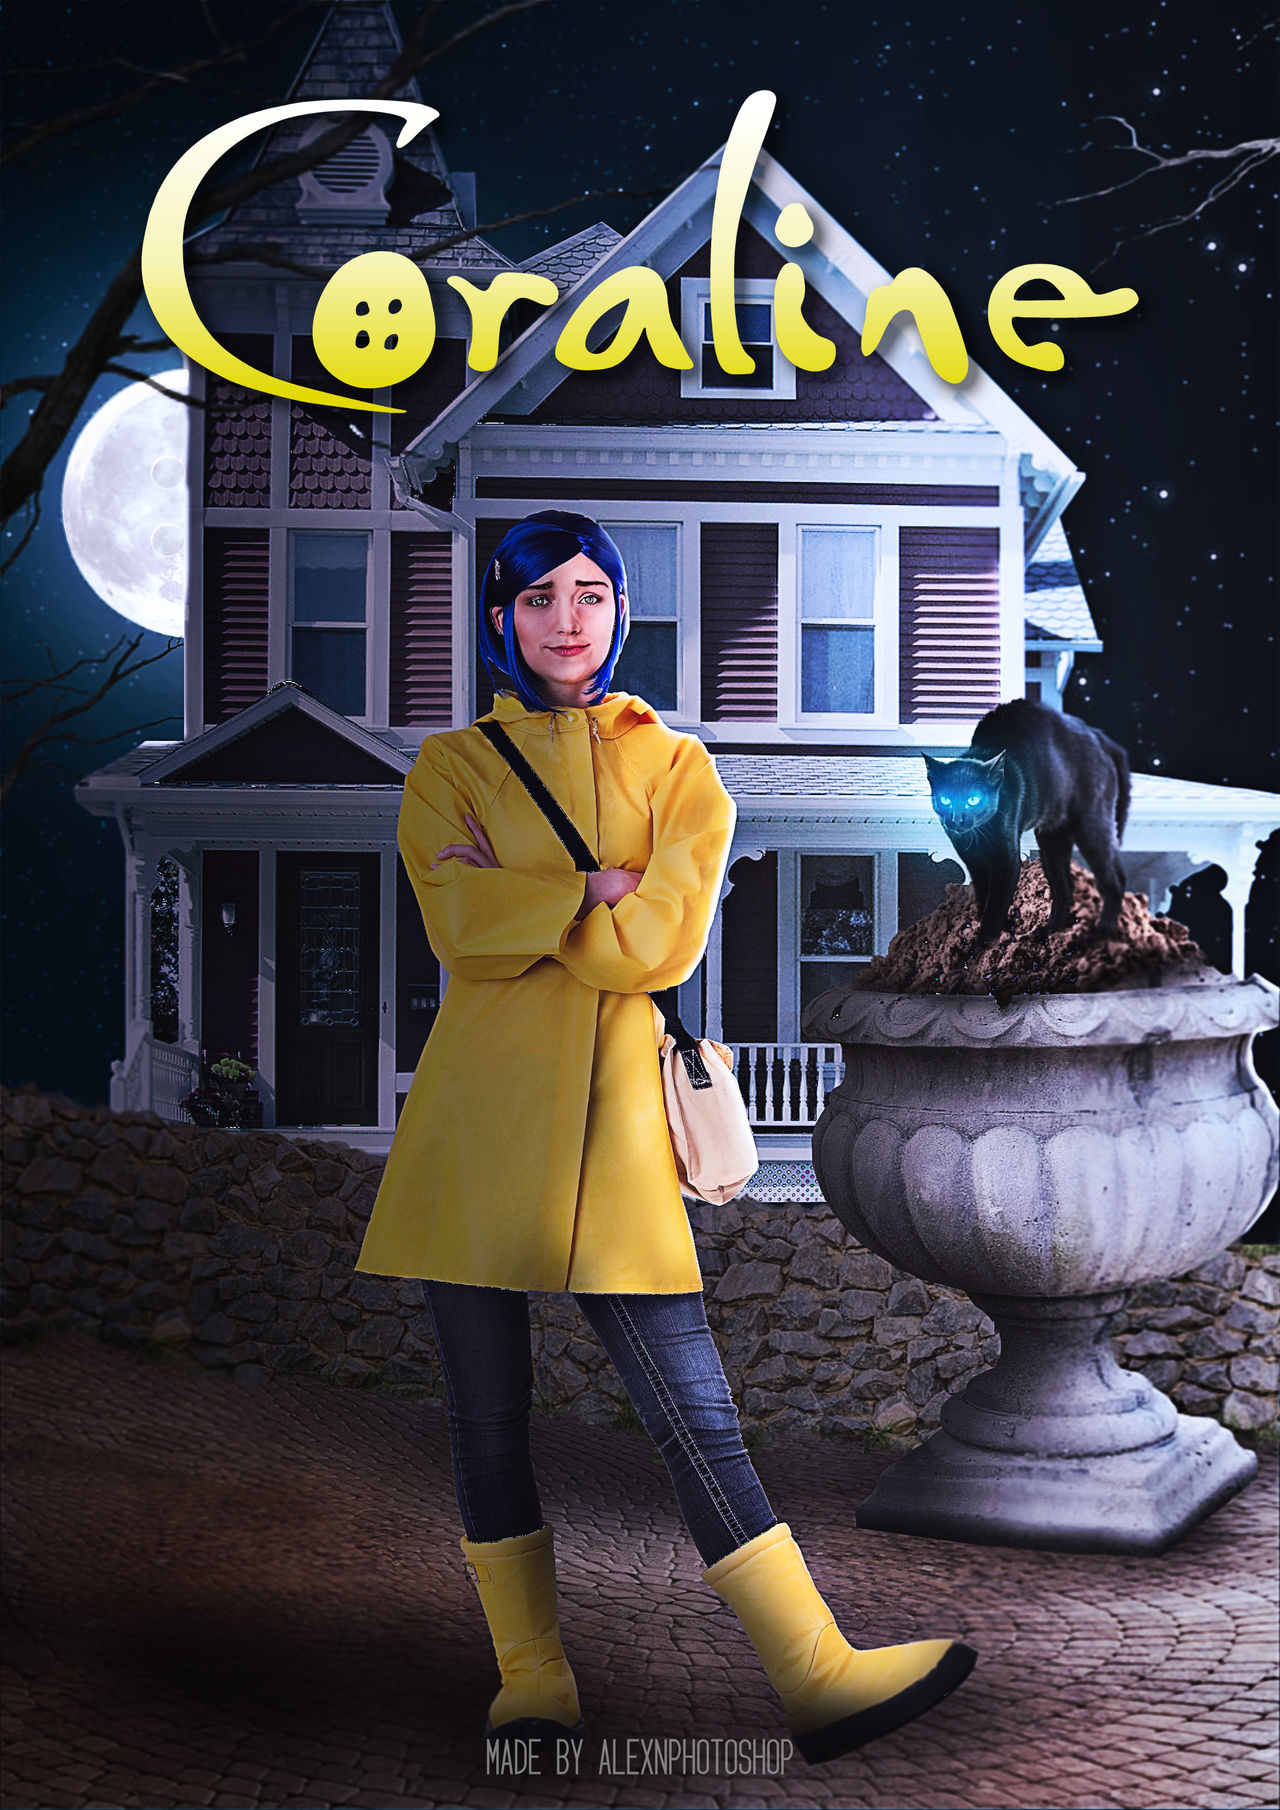 I made a poster for the Coraline movie by Spencie5 on DeviantArt